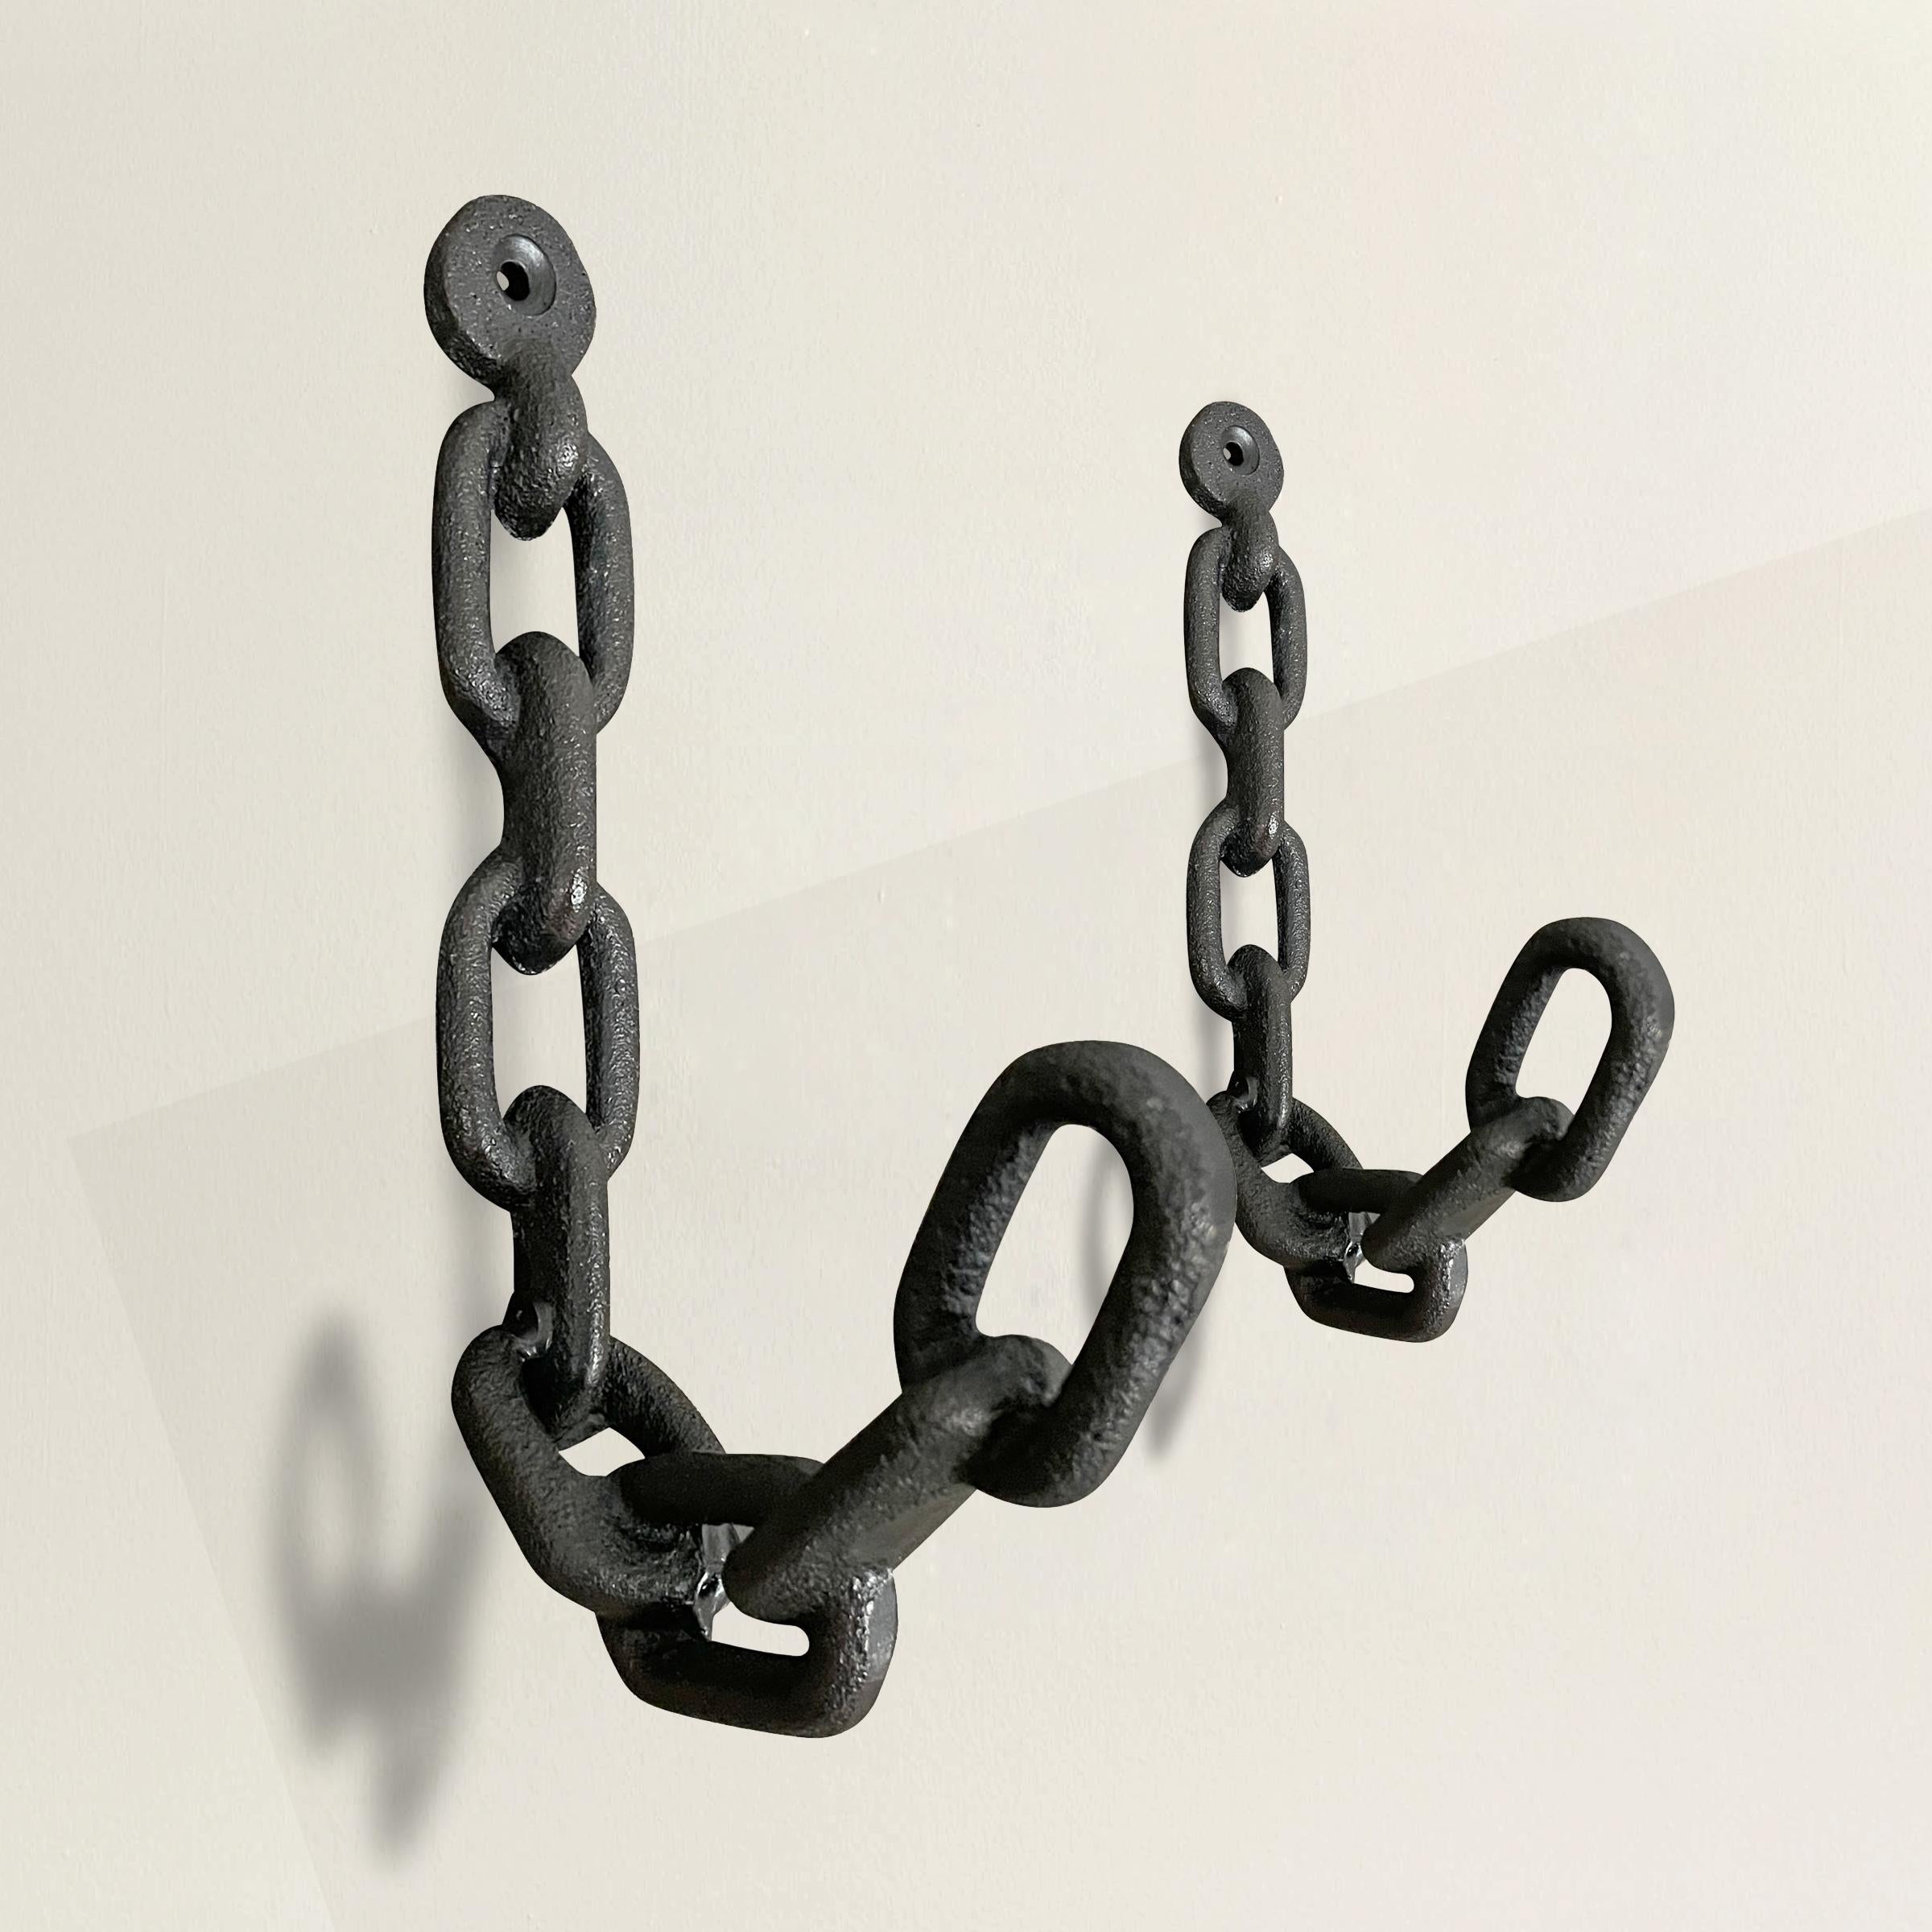 A striking pair of cast iron wall hooks designed to mimic chain links, and perfect for holding coats, hats, bags, dog leashes, or any myriad things you need to organize.